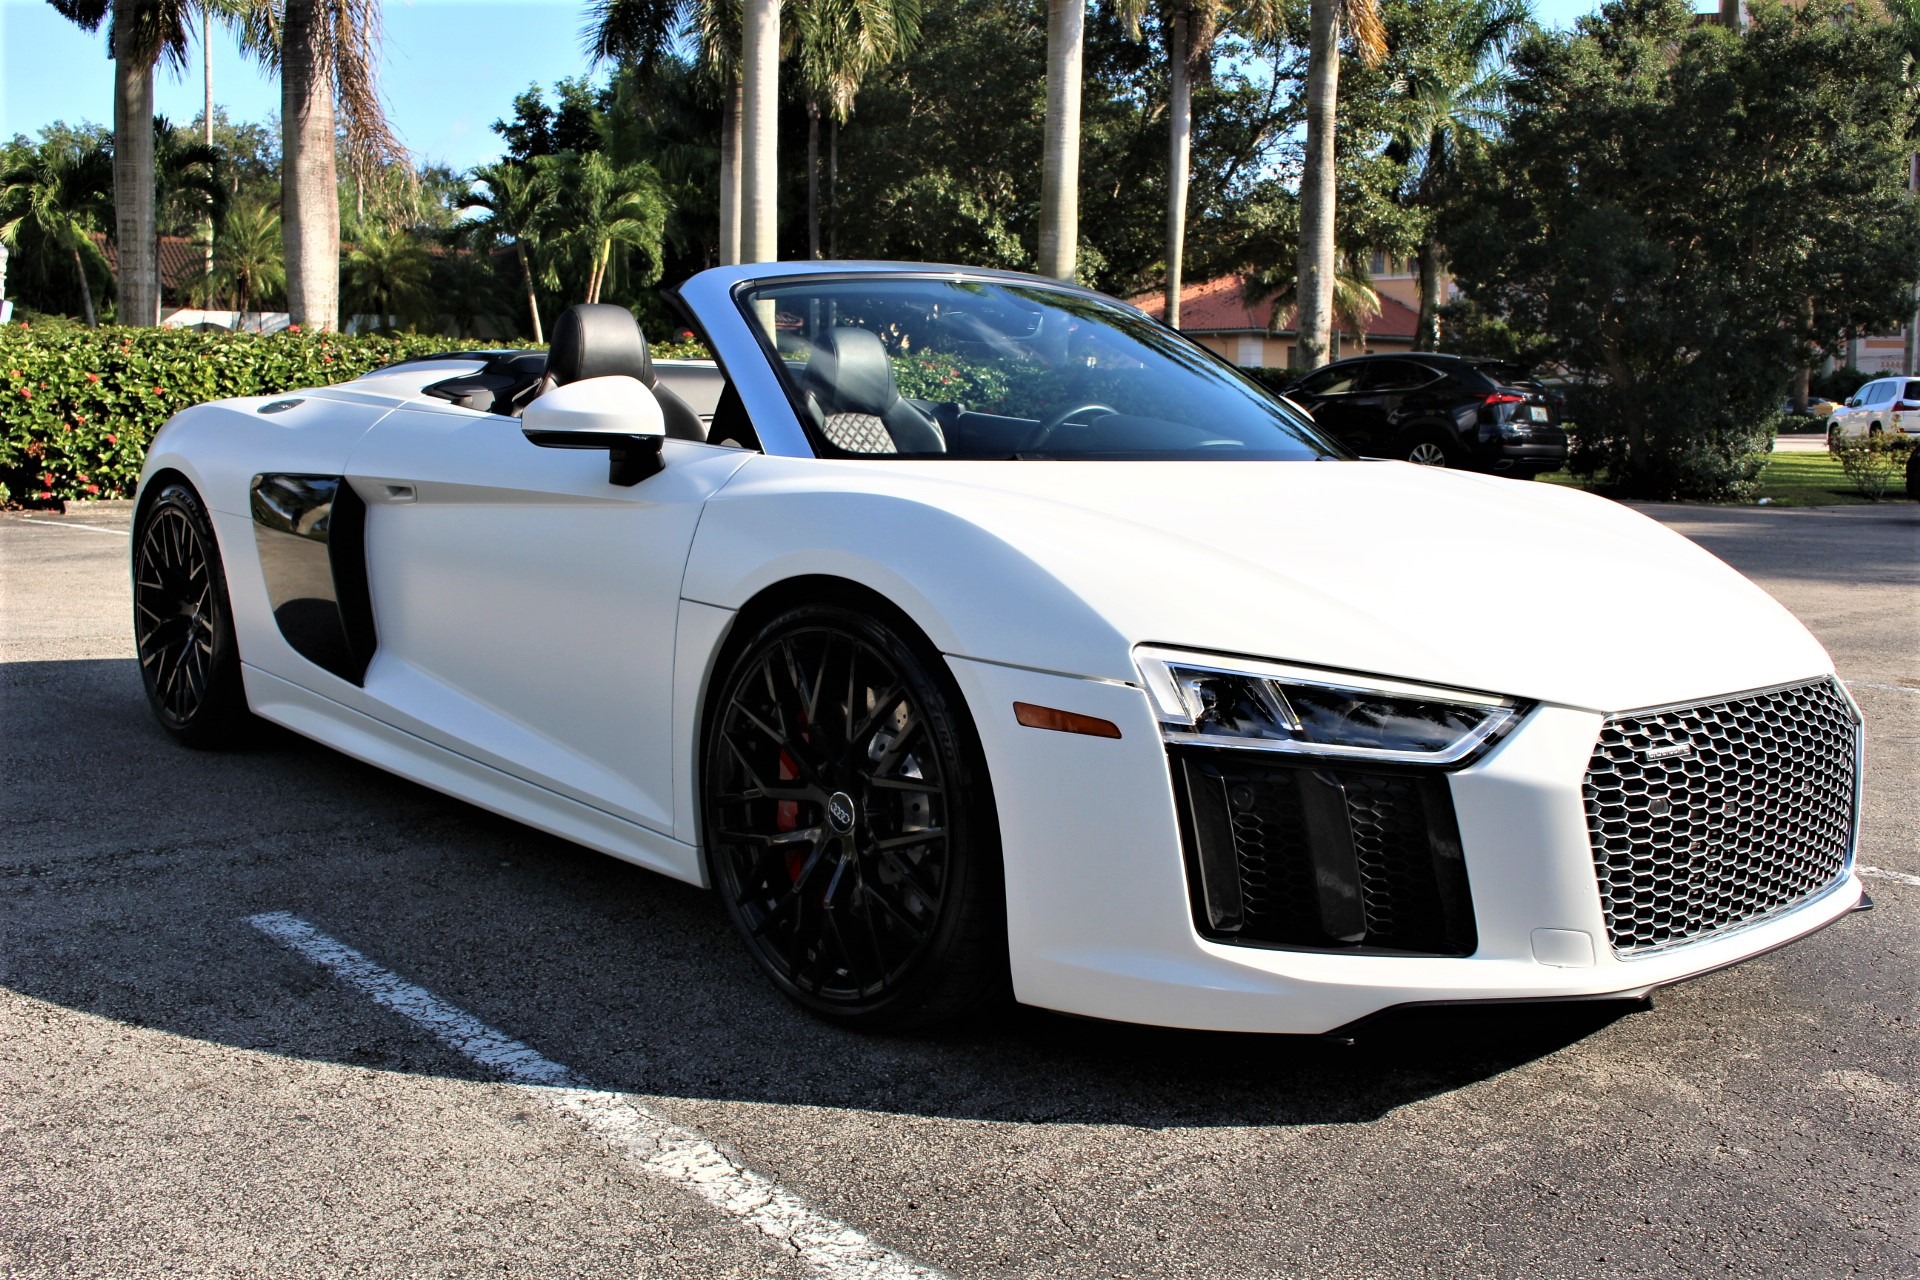 Used 2017 Audi R8 5.2 quattro V10 Spyder for sale Sold at The Gables Sports Cars in Miami FL 33146 3